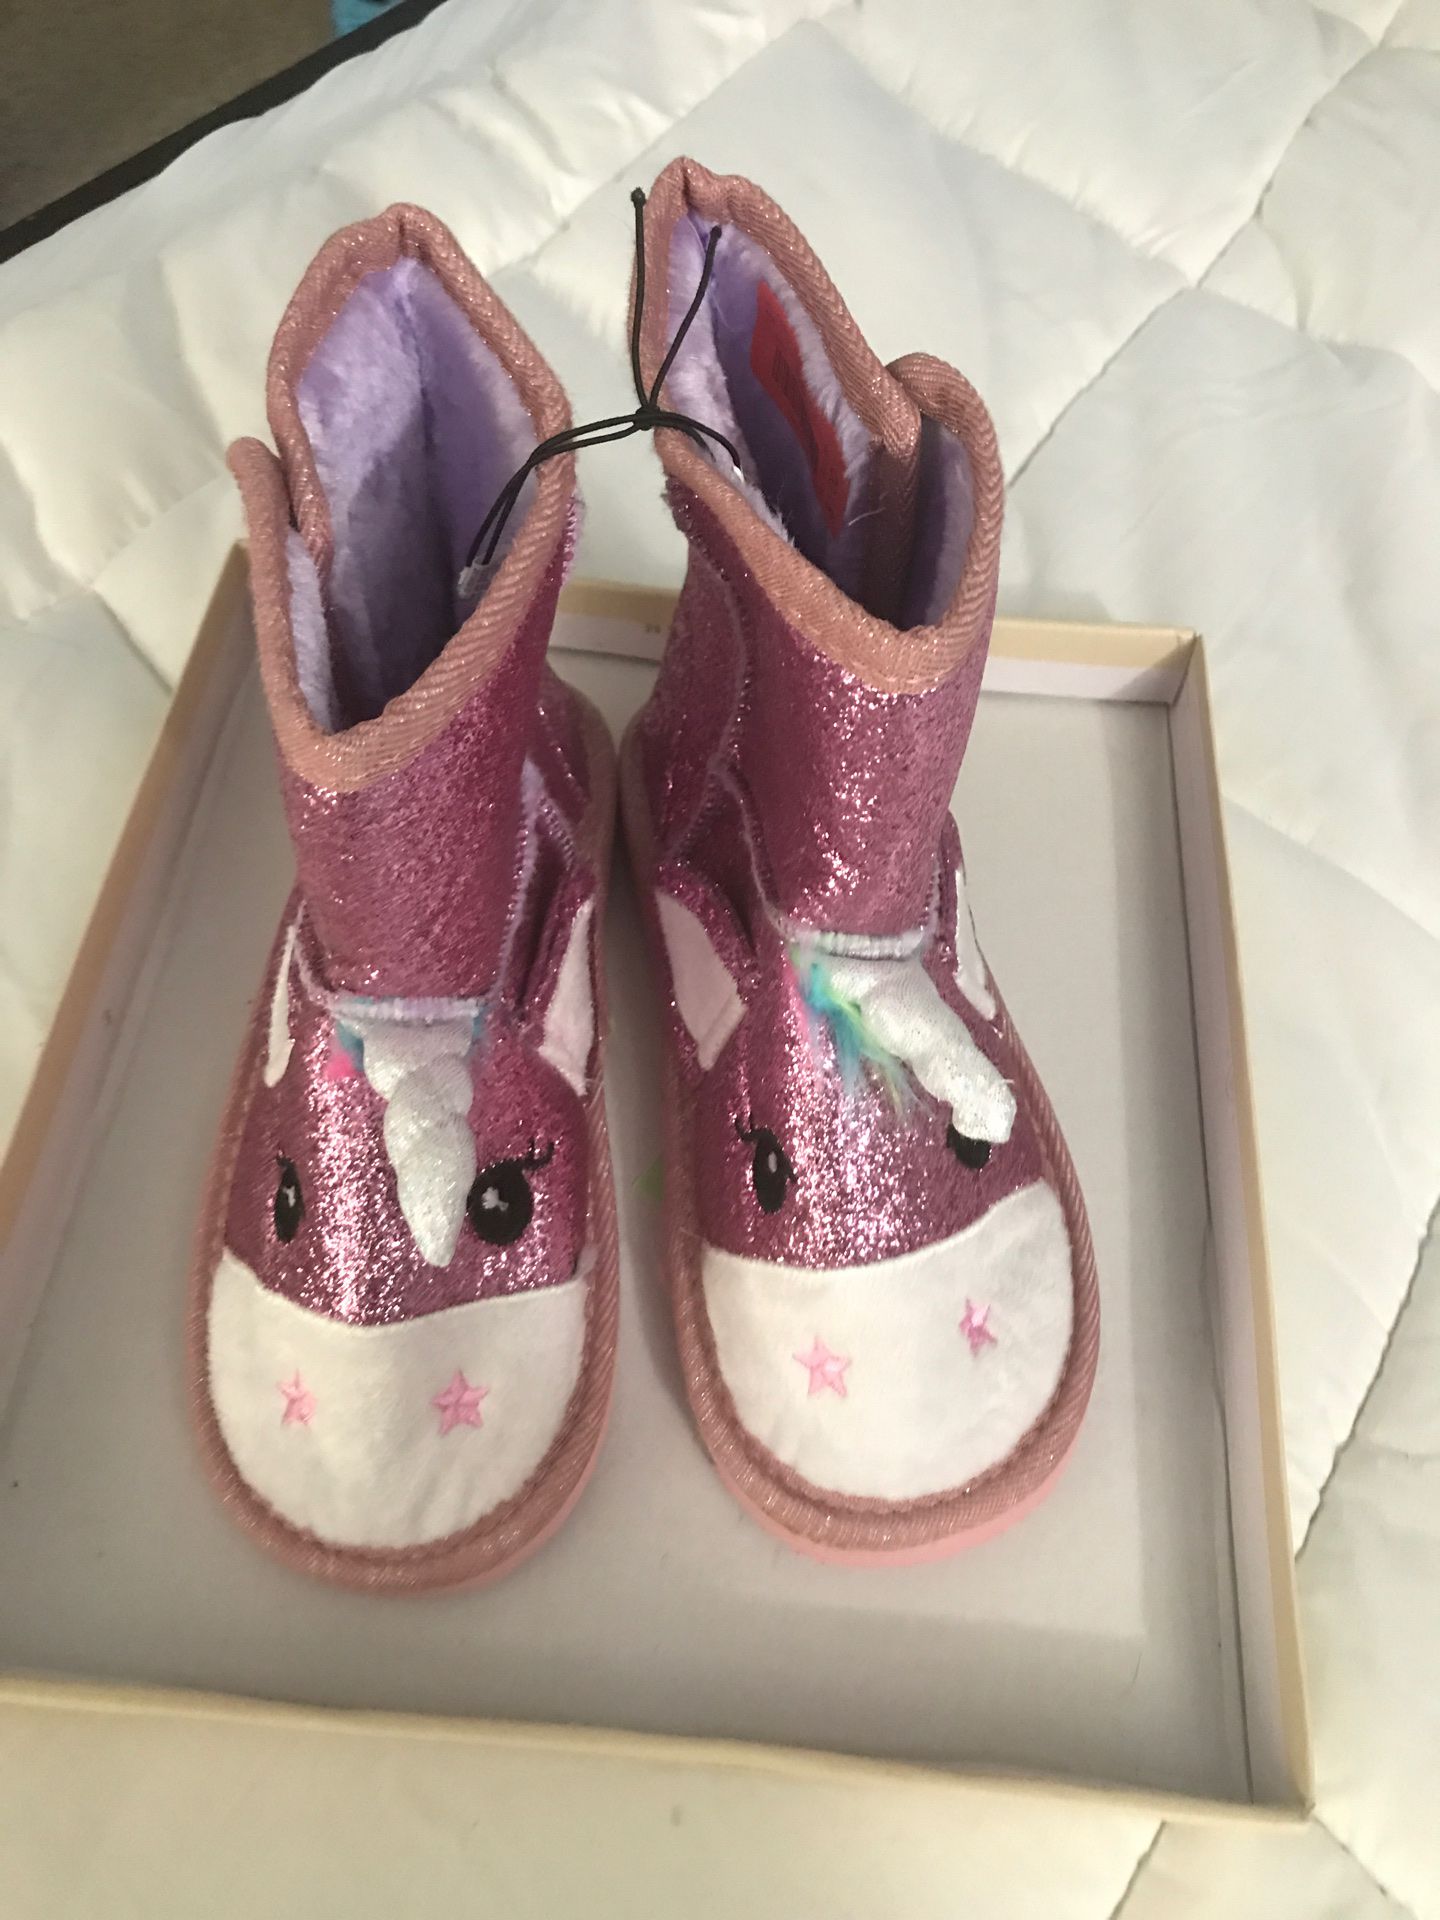 Girls toddler size 4 unicorn boots. BEST OFFER